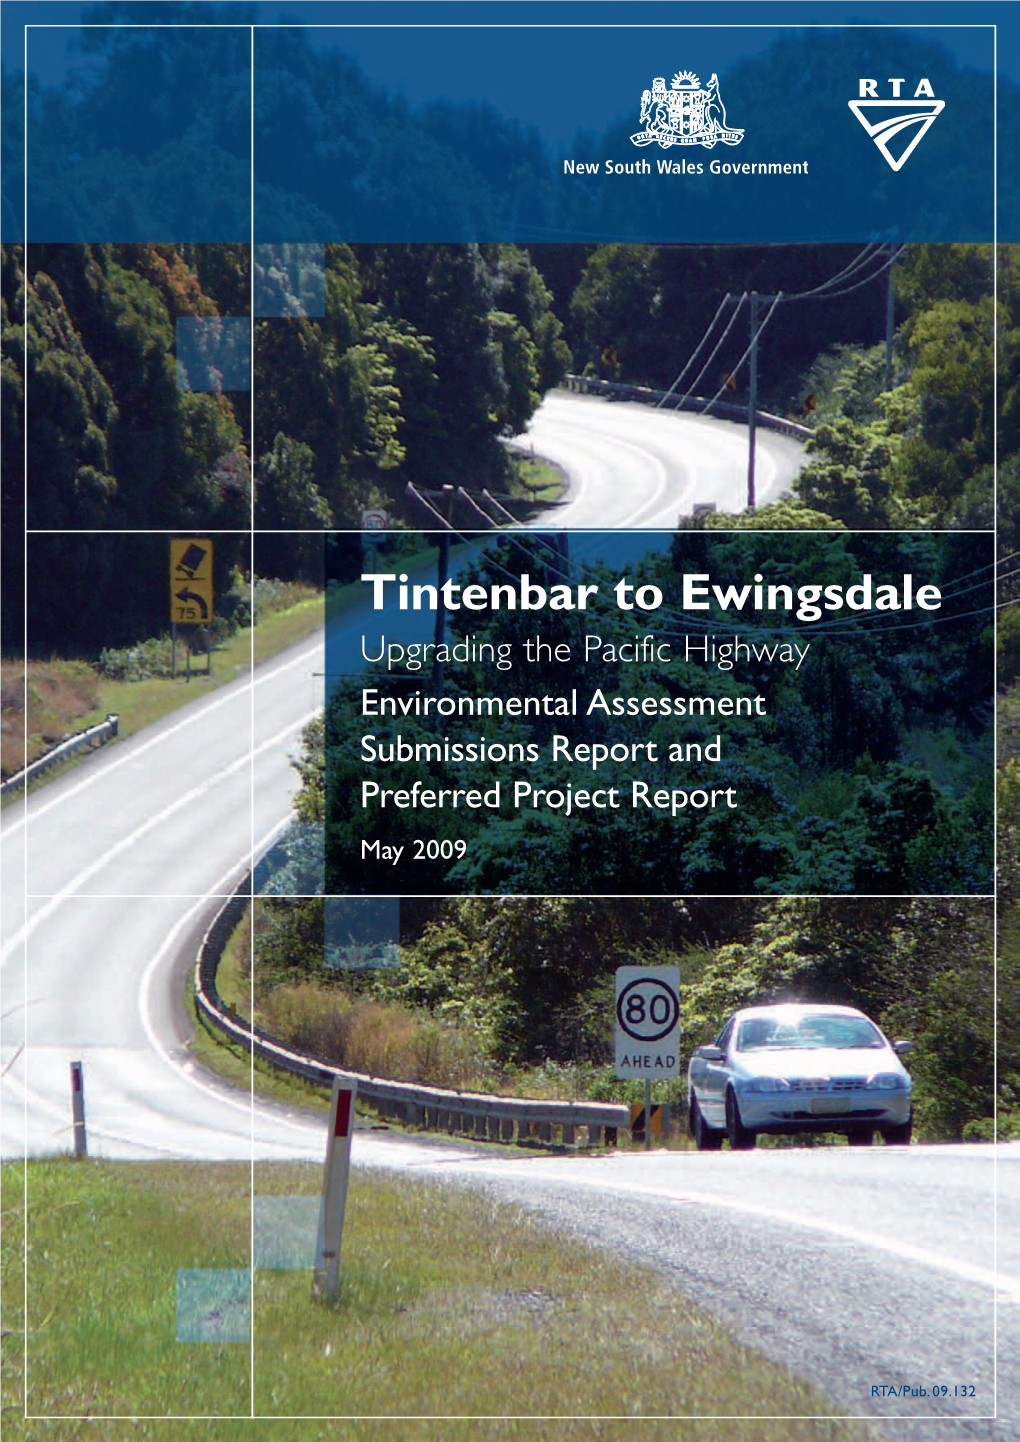 Tintenbar to Ewingsdale Upgrading the Pacific Highway Environmental Assessment Submissions Report and Preferred Project Report May 2009